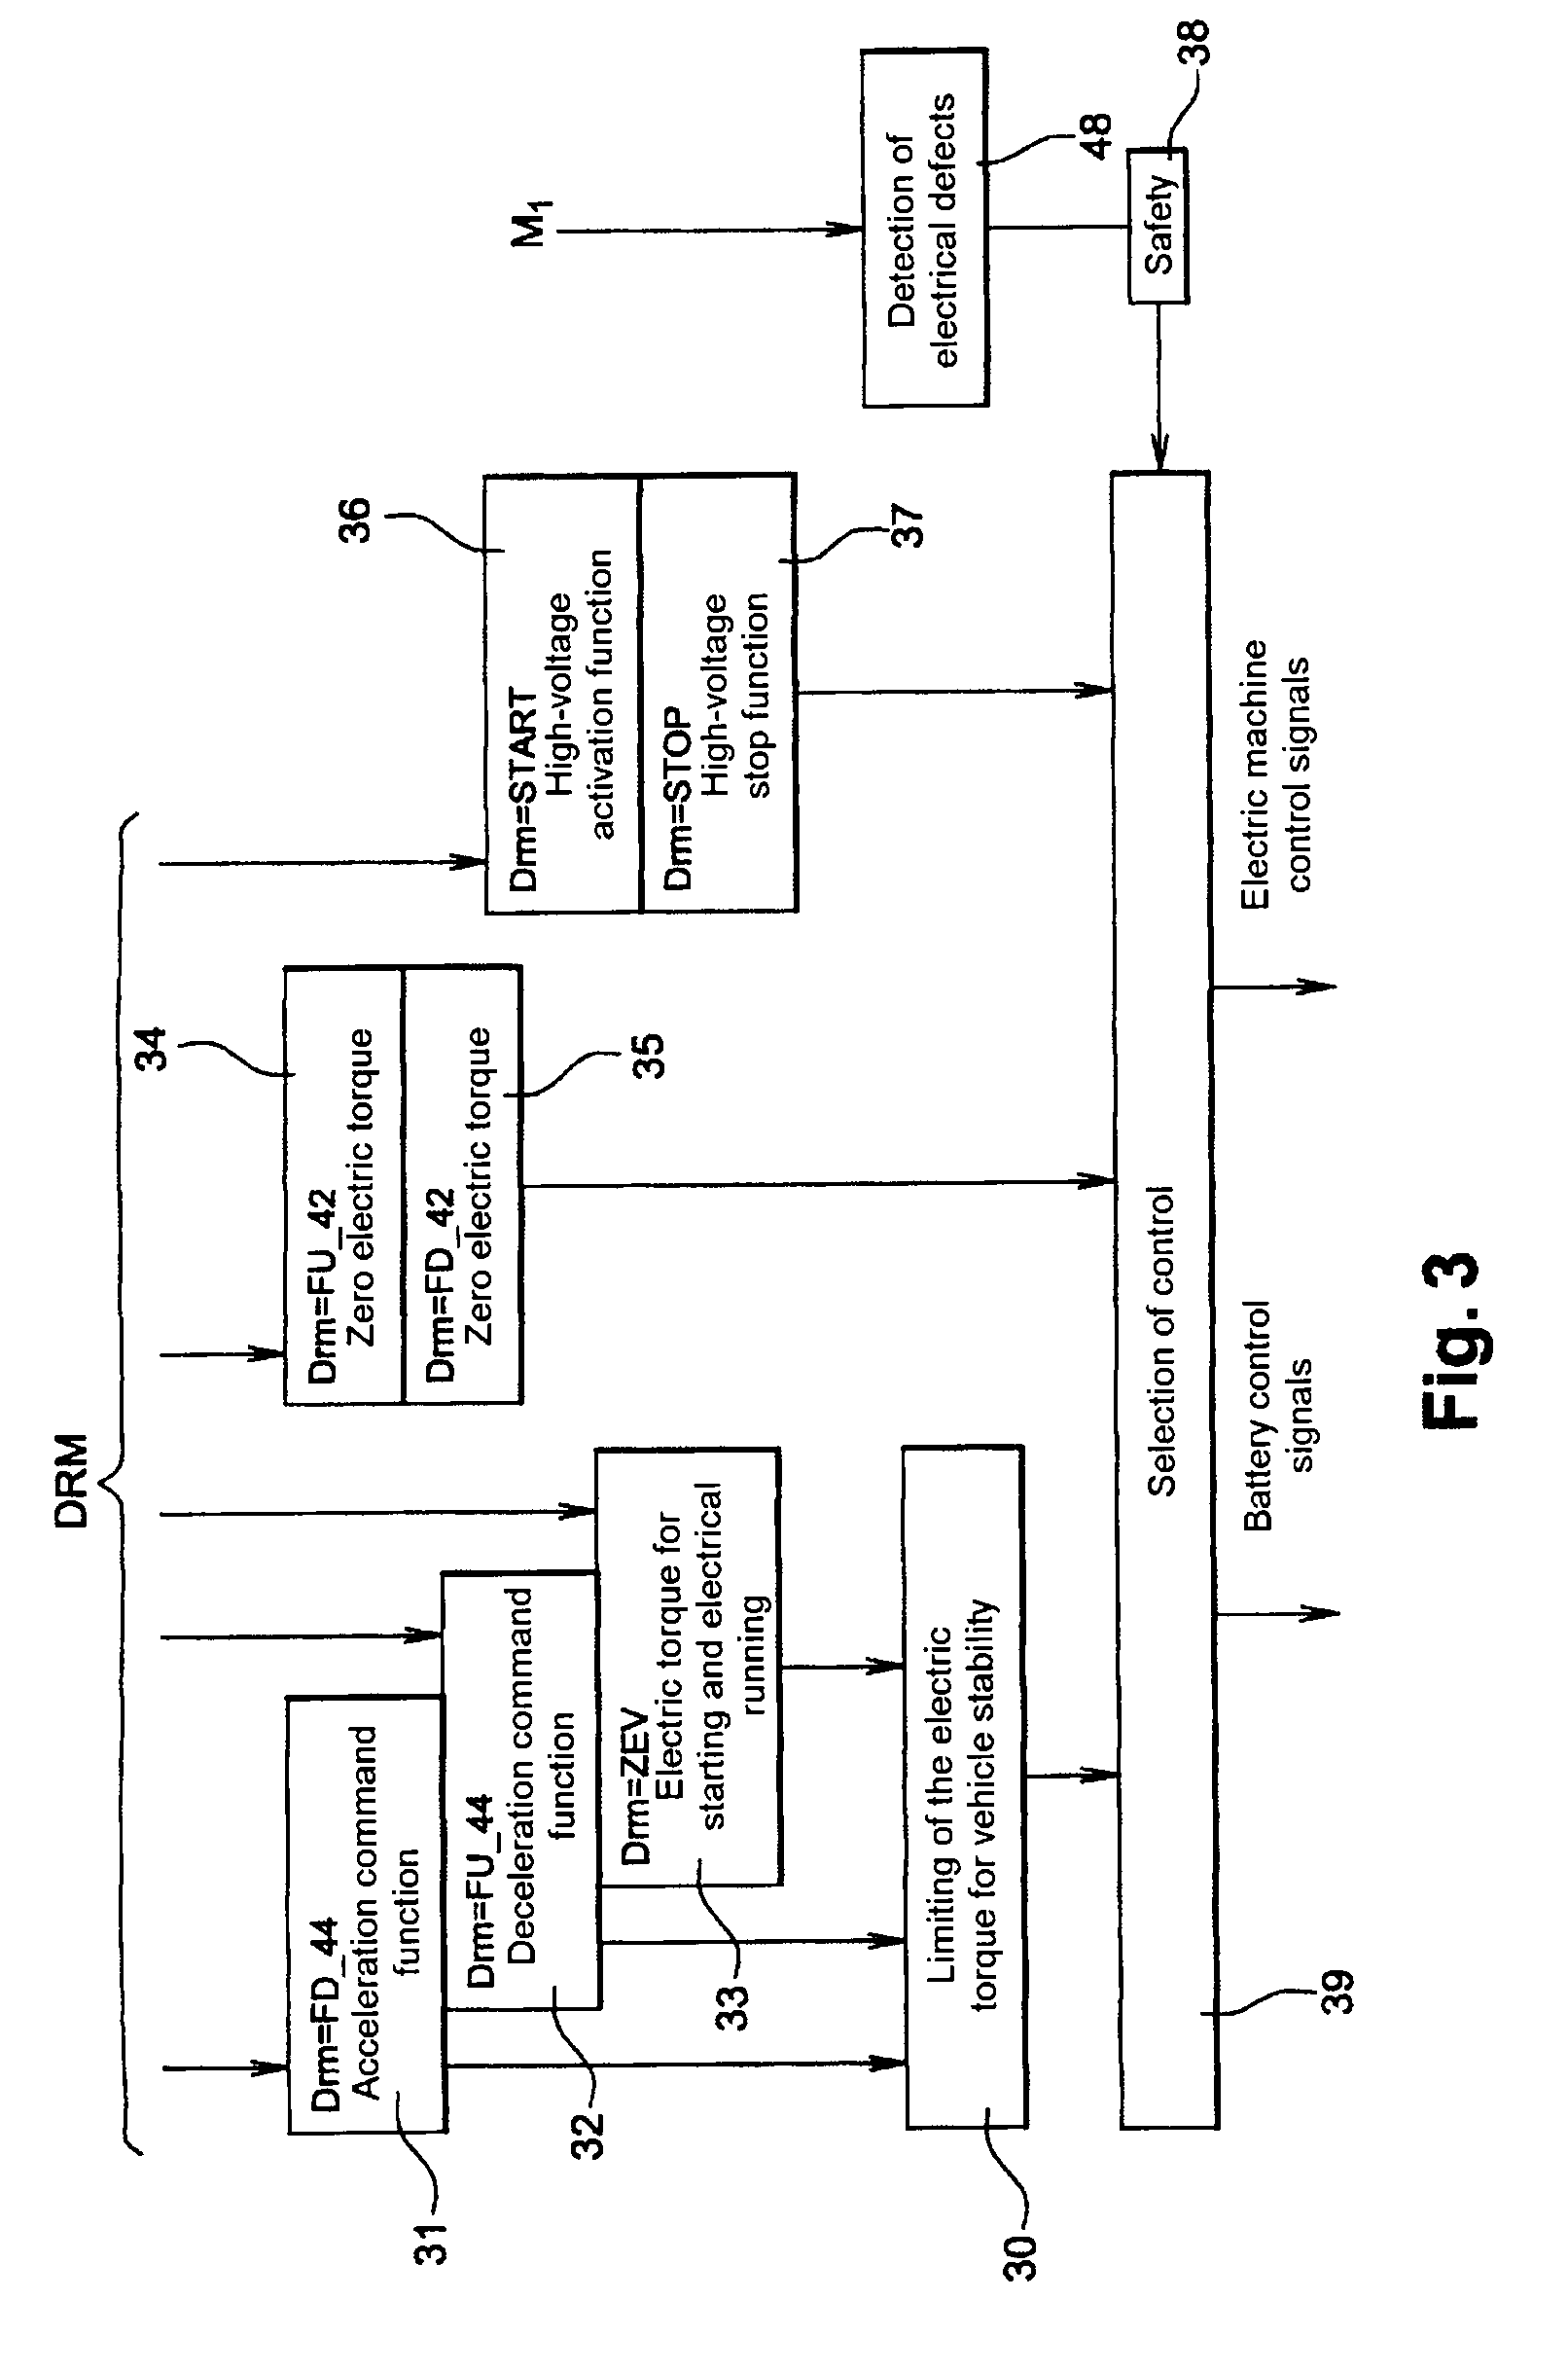 Method and device for controlling and monitoring a hybrid four-wheel drive vehicle